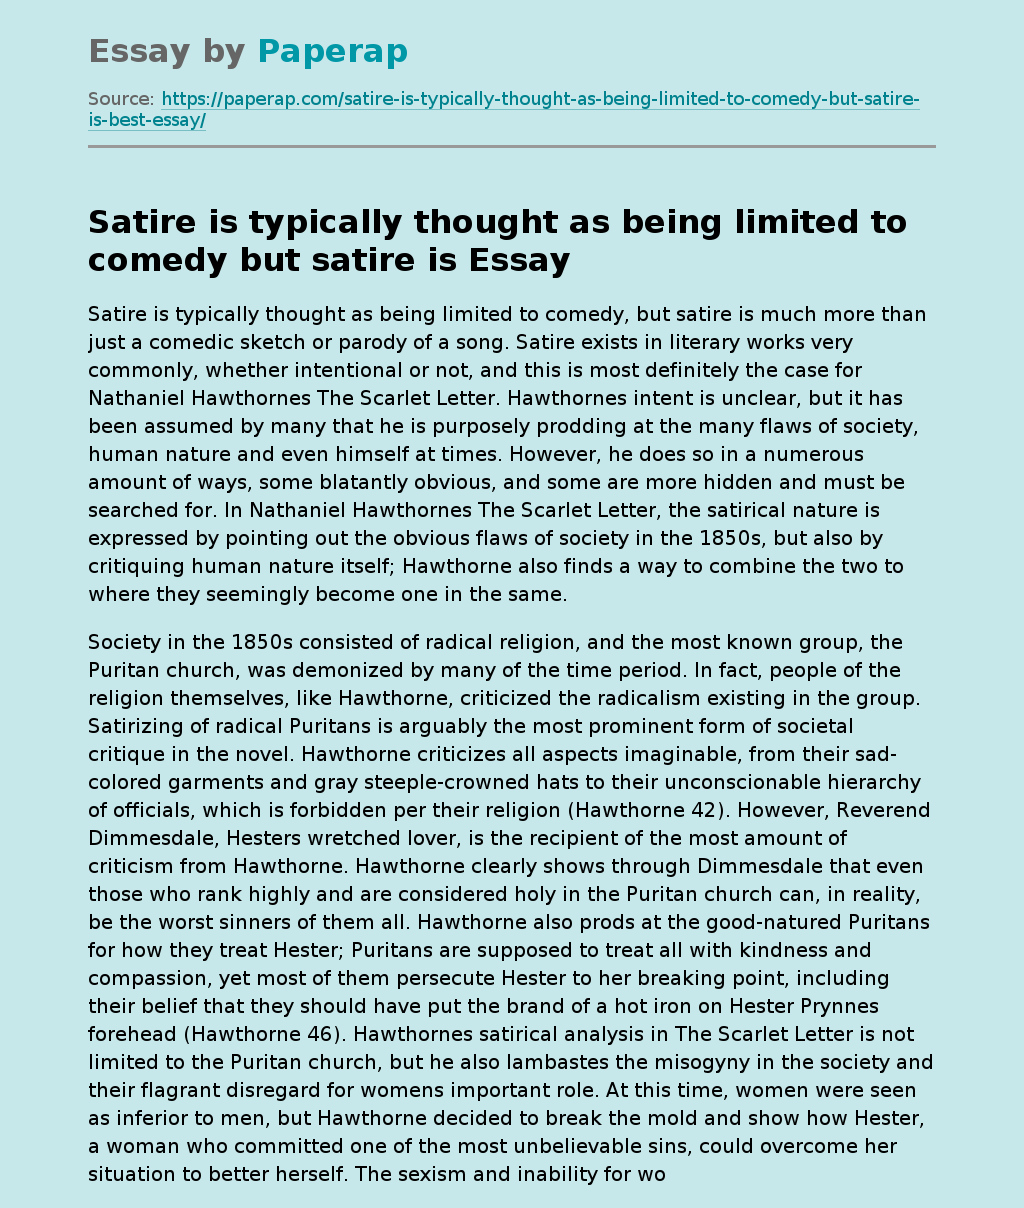 Satire in The Scarlet Letter by Nathaniel Hawthorne